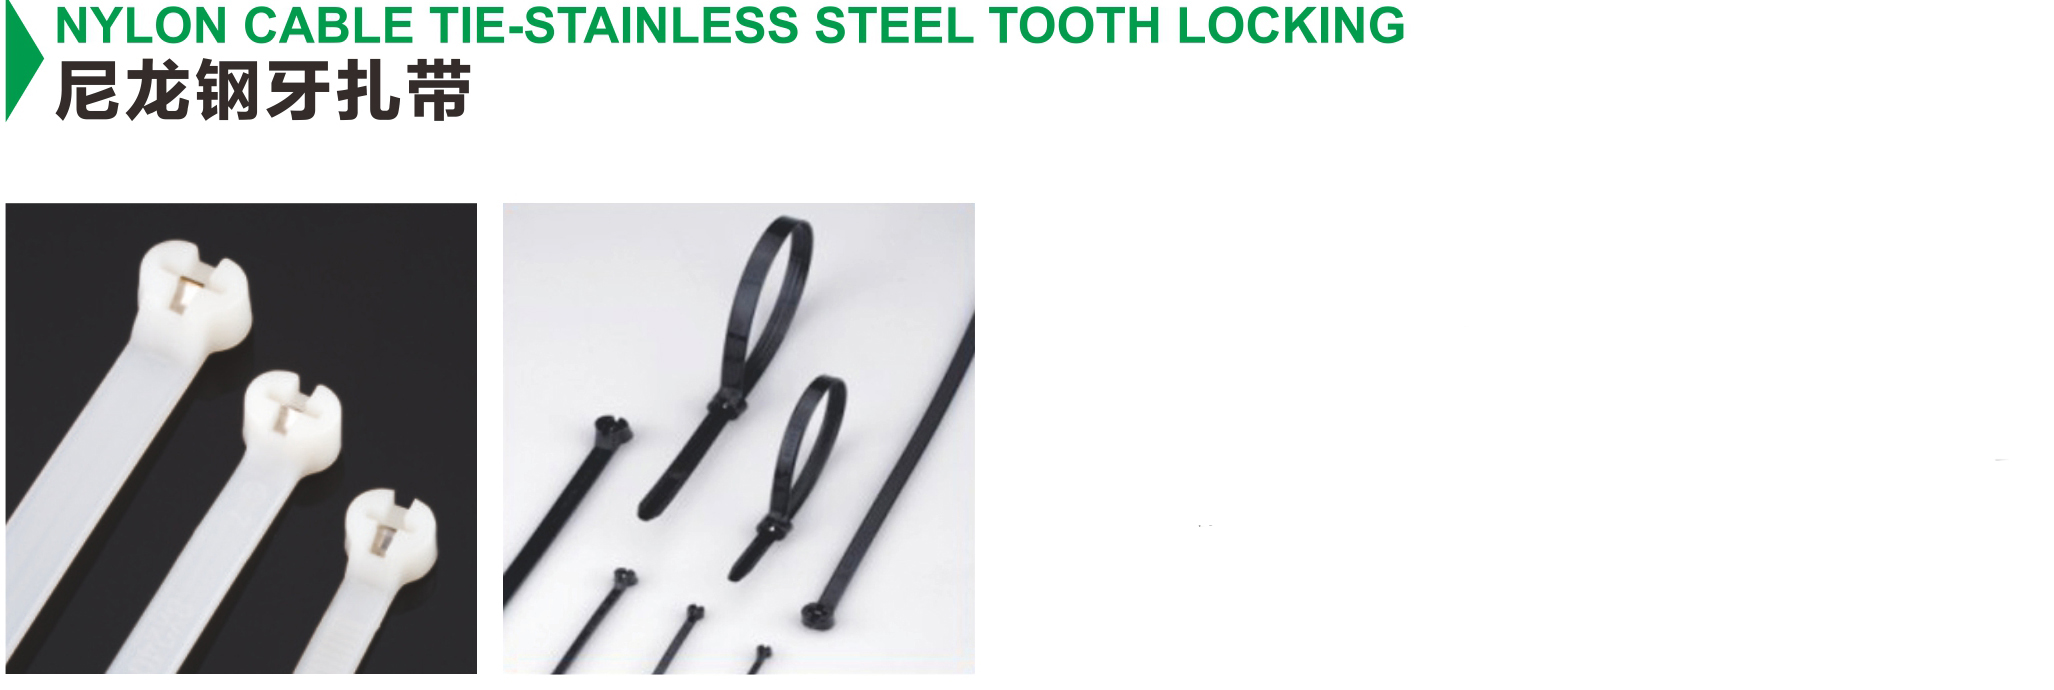 NYLON CABLE TIE-STAINLESS STEEL TOOTH LOCKING